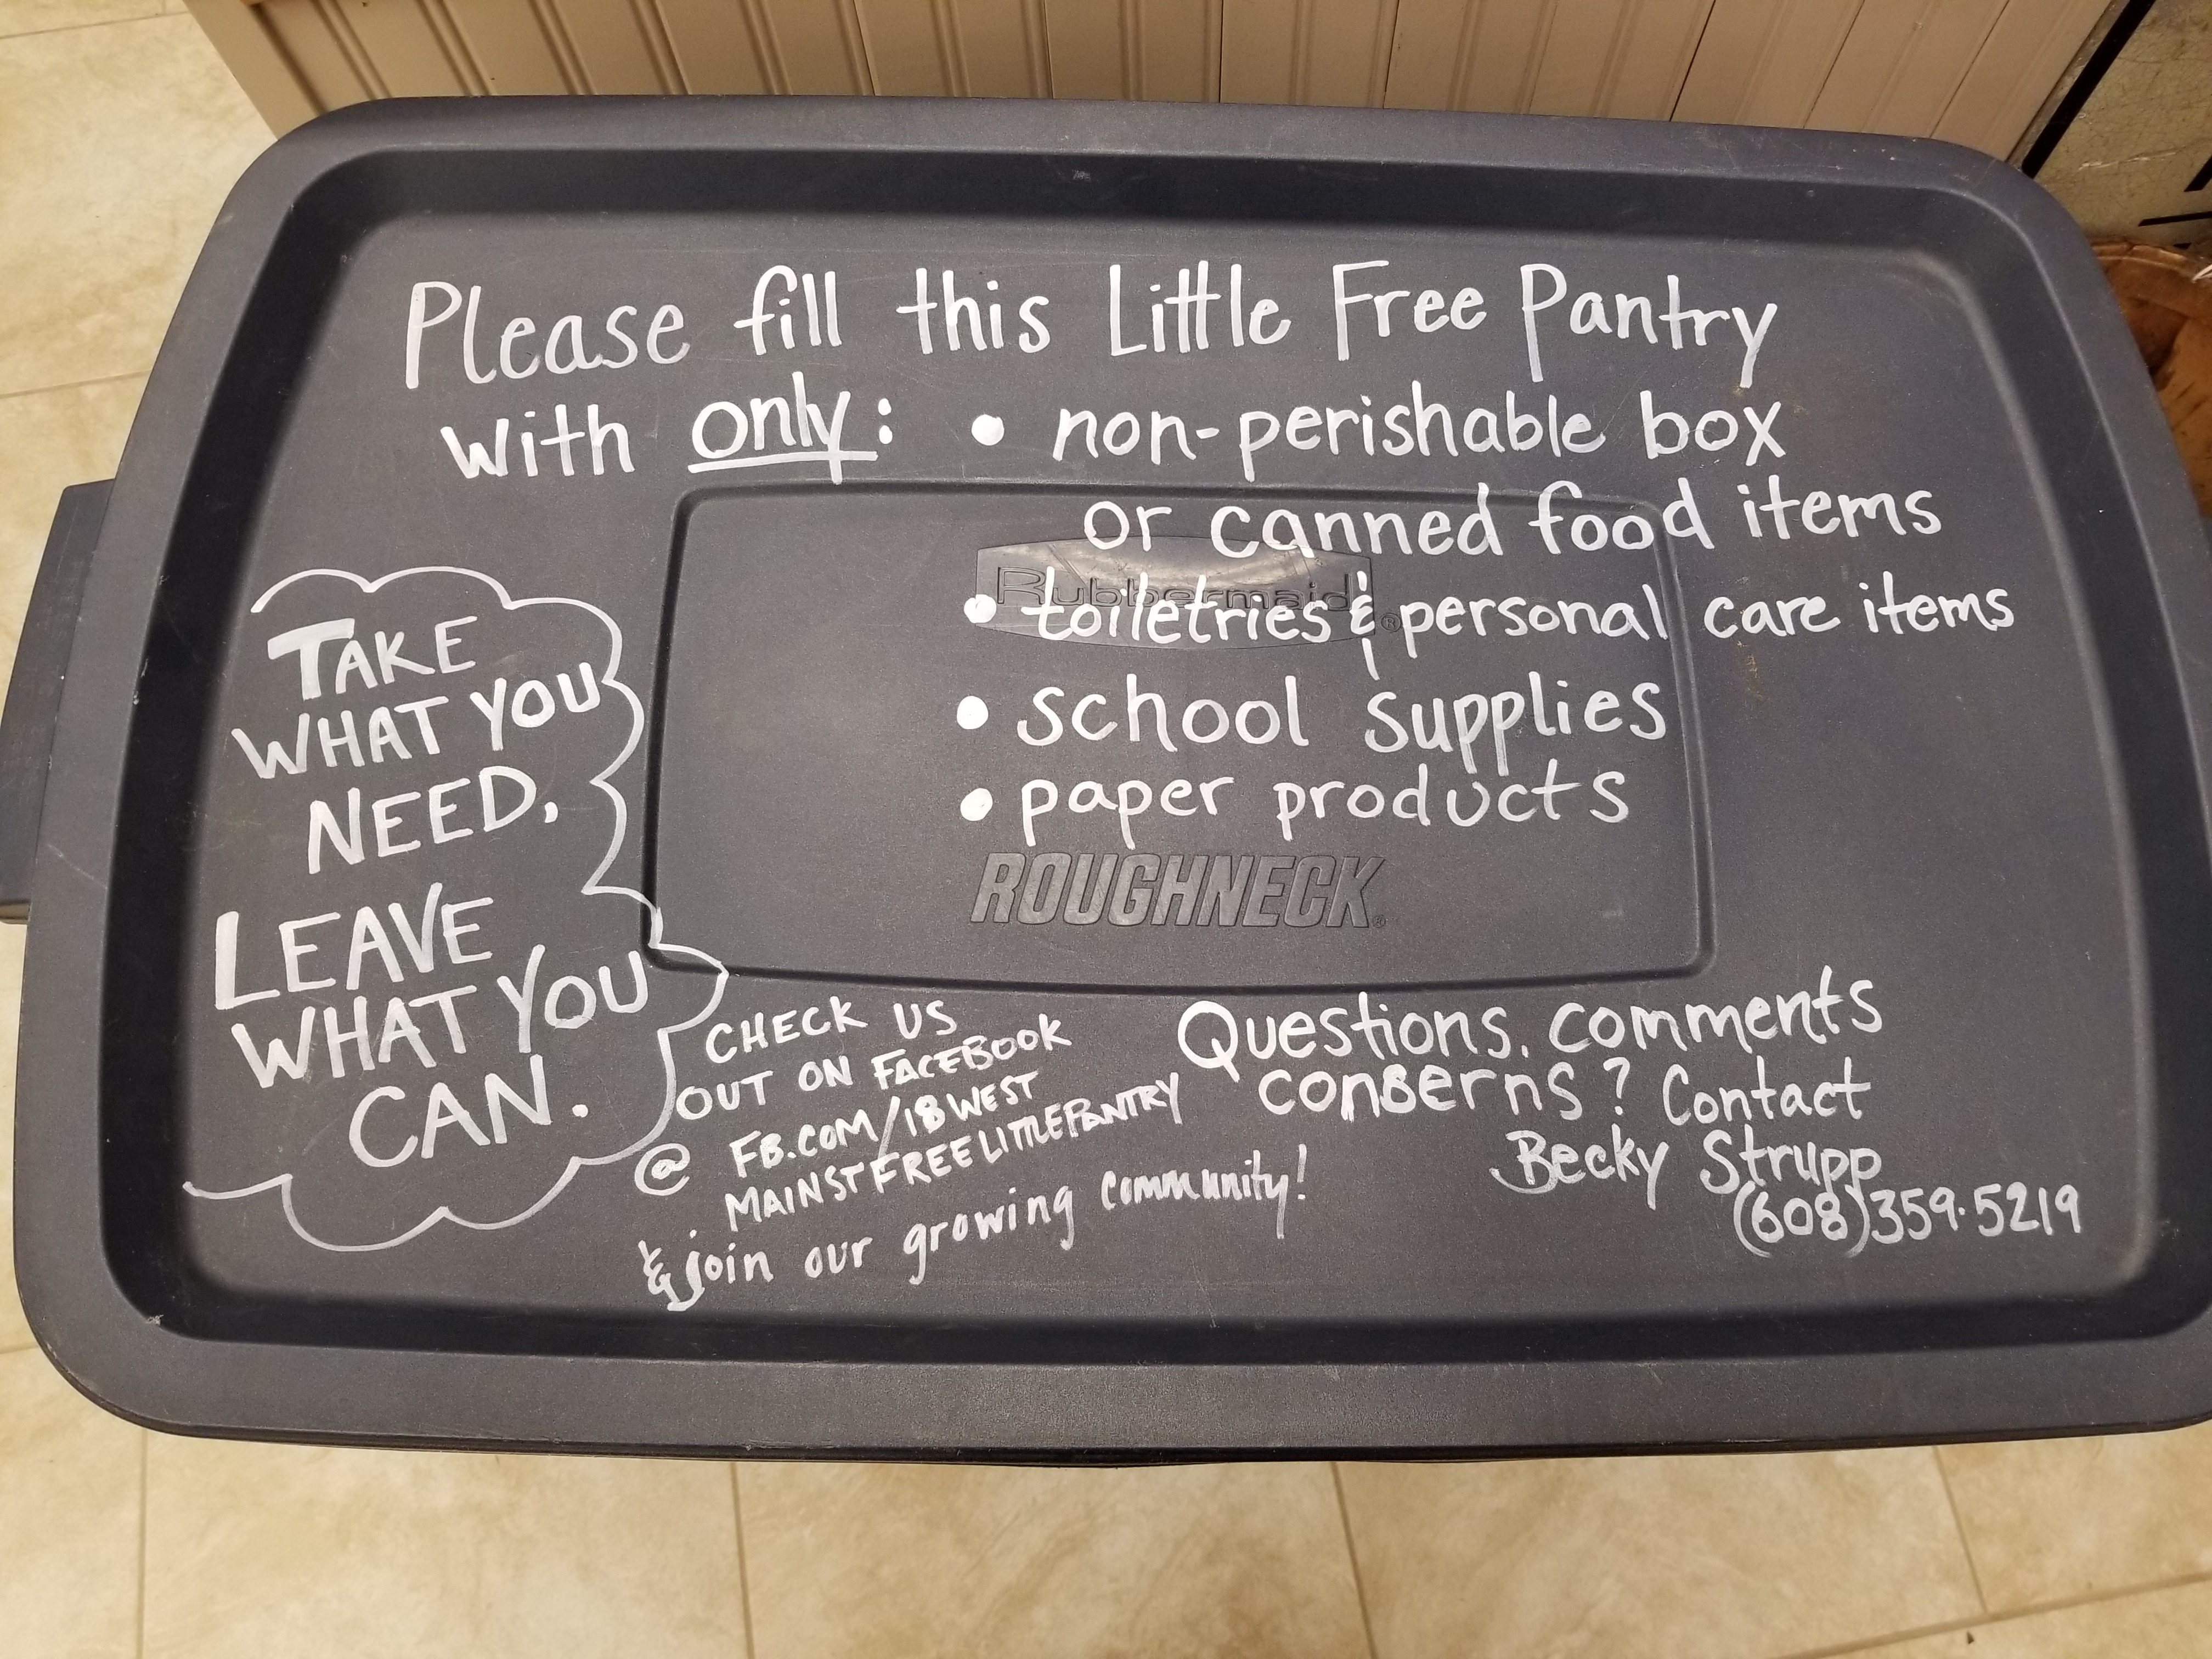 18 West Main St. Free Little Pantry Photo 2